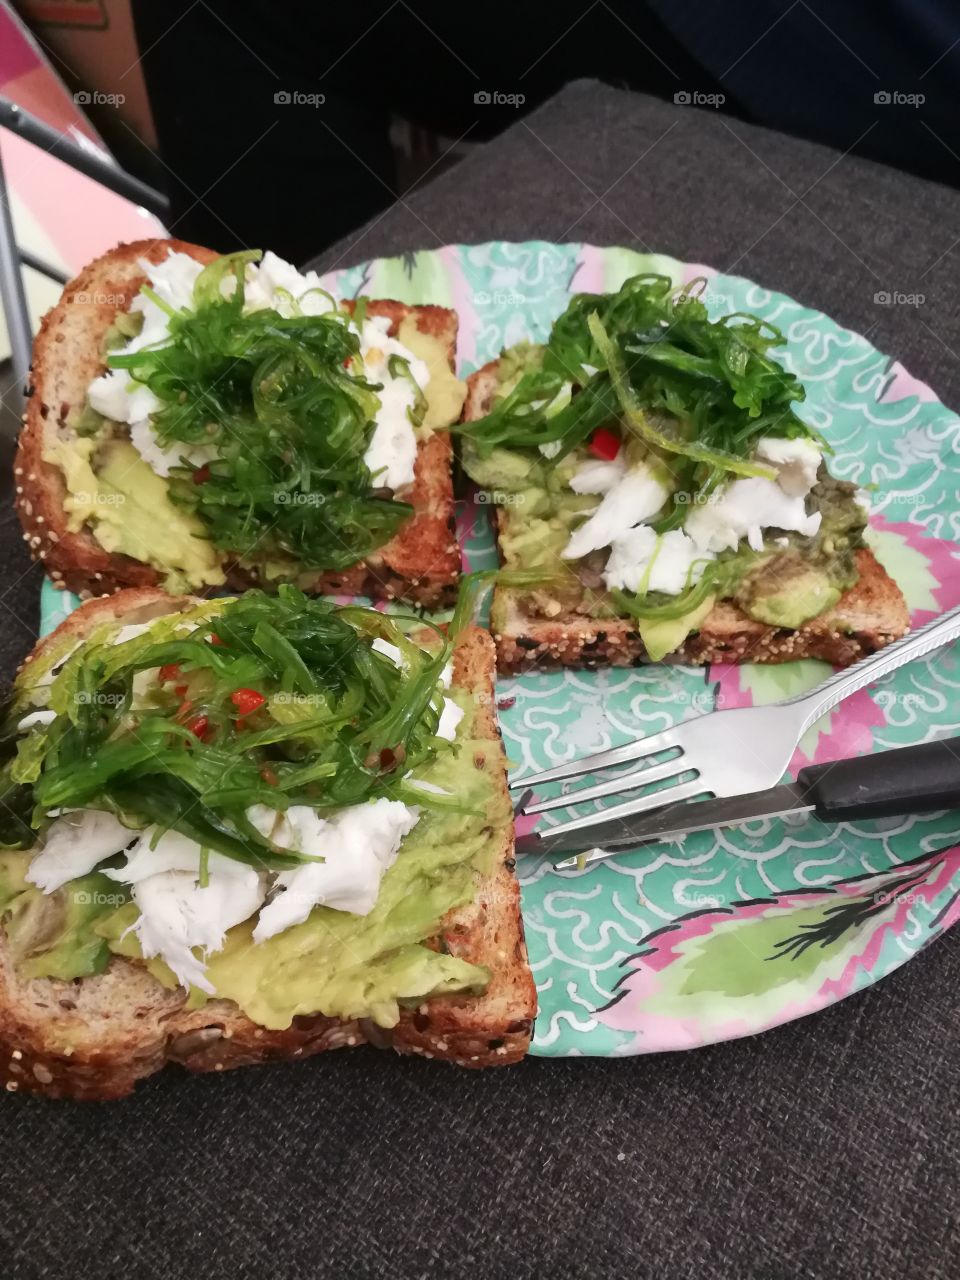 Avocado in toast done my way